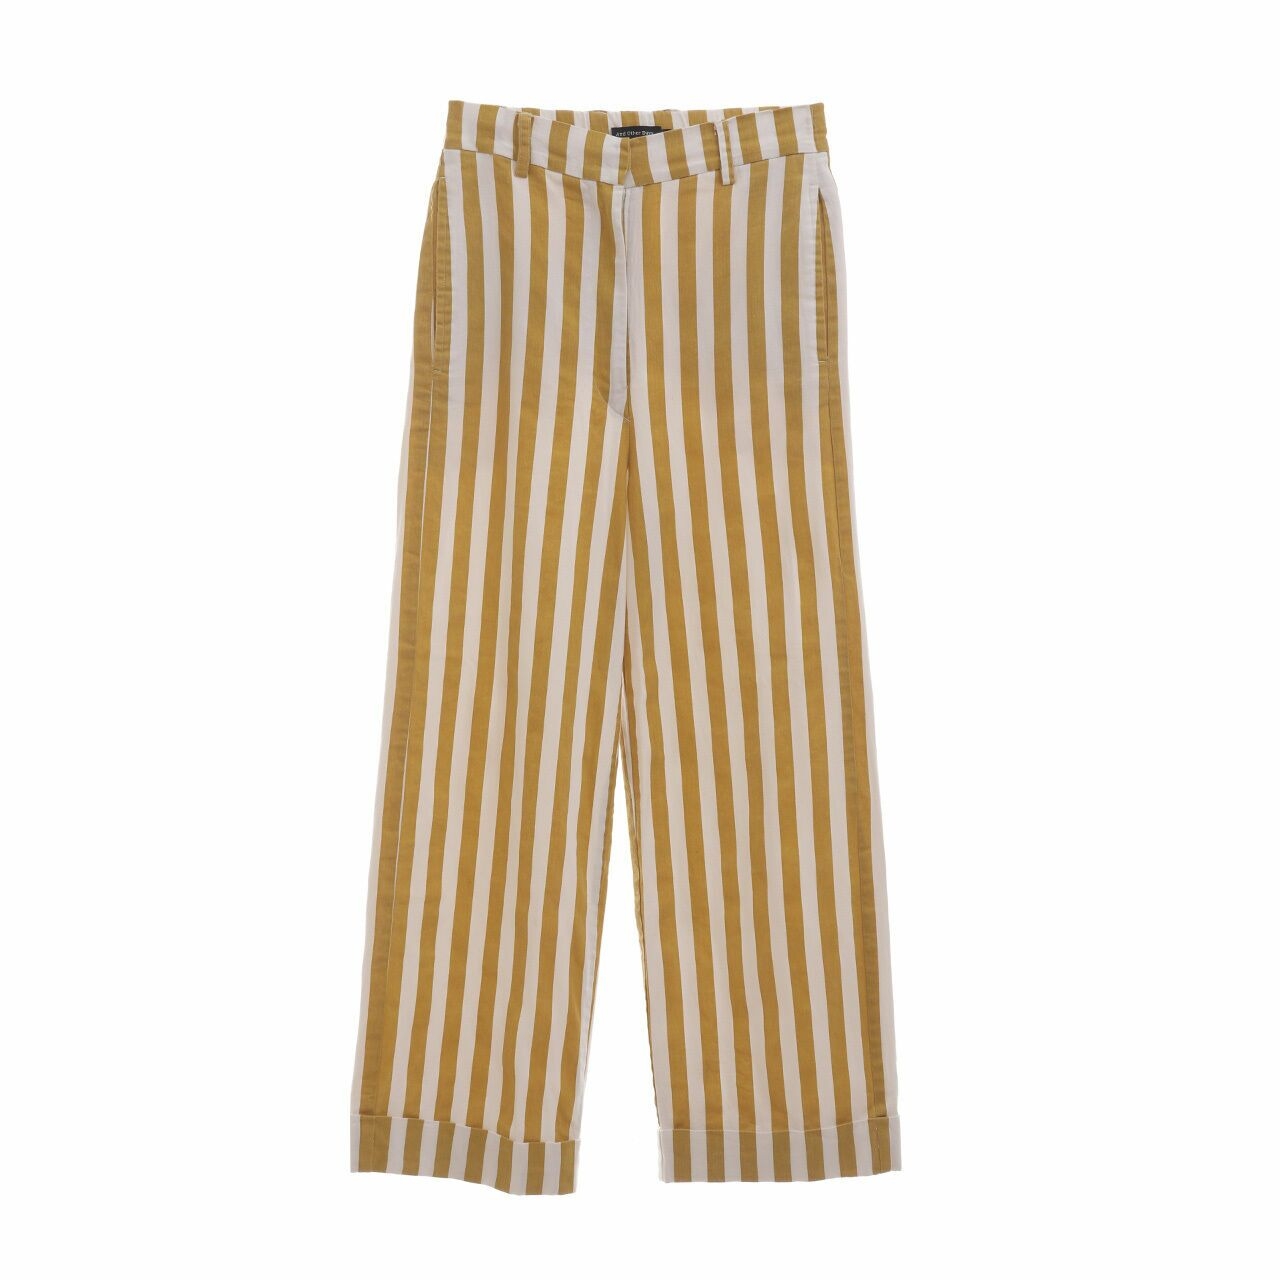 & Other Days White & Mustard Stripes Long Pants 